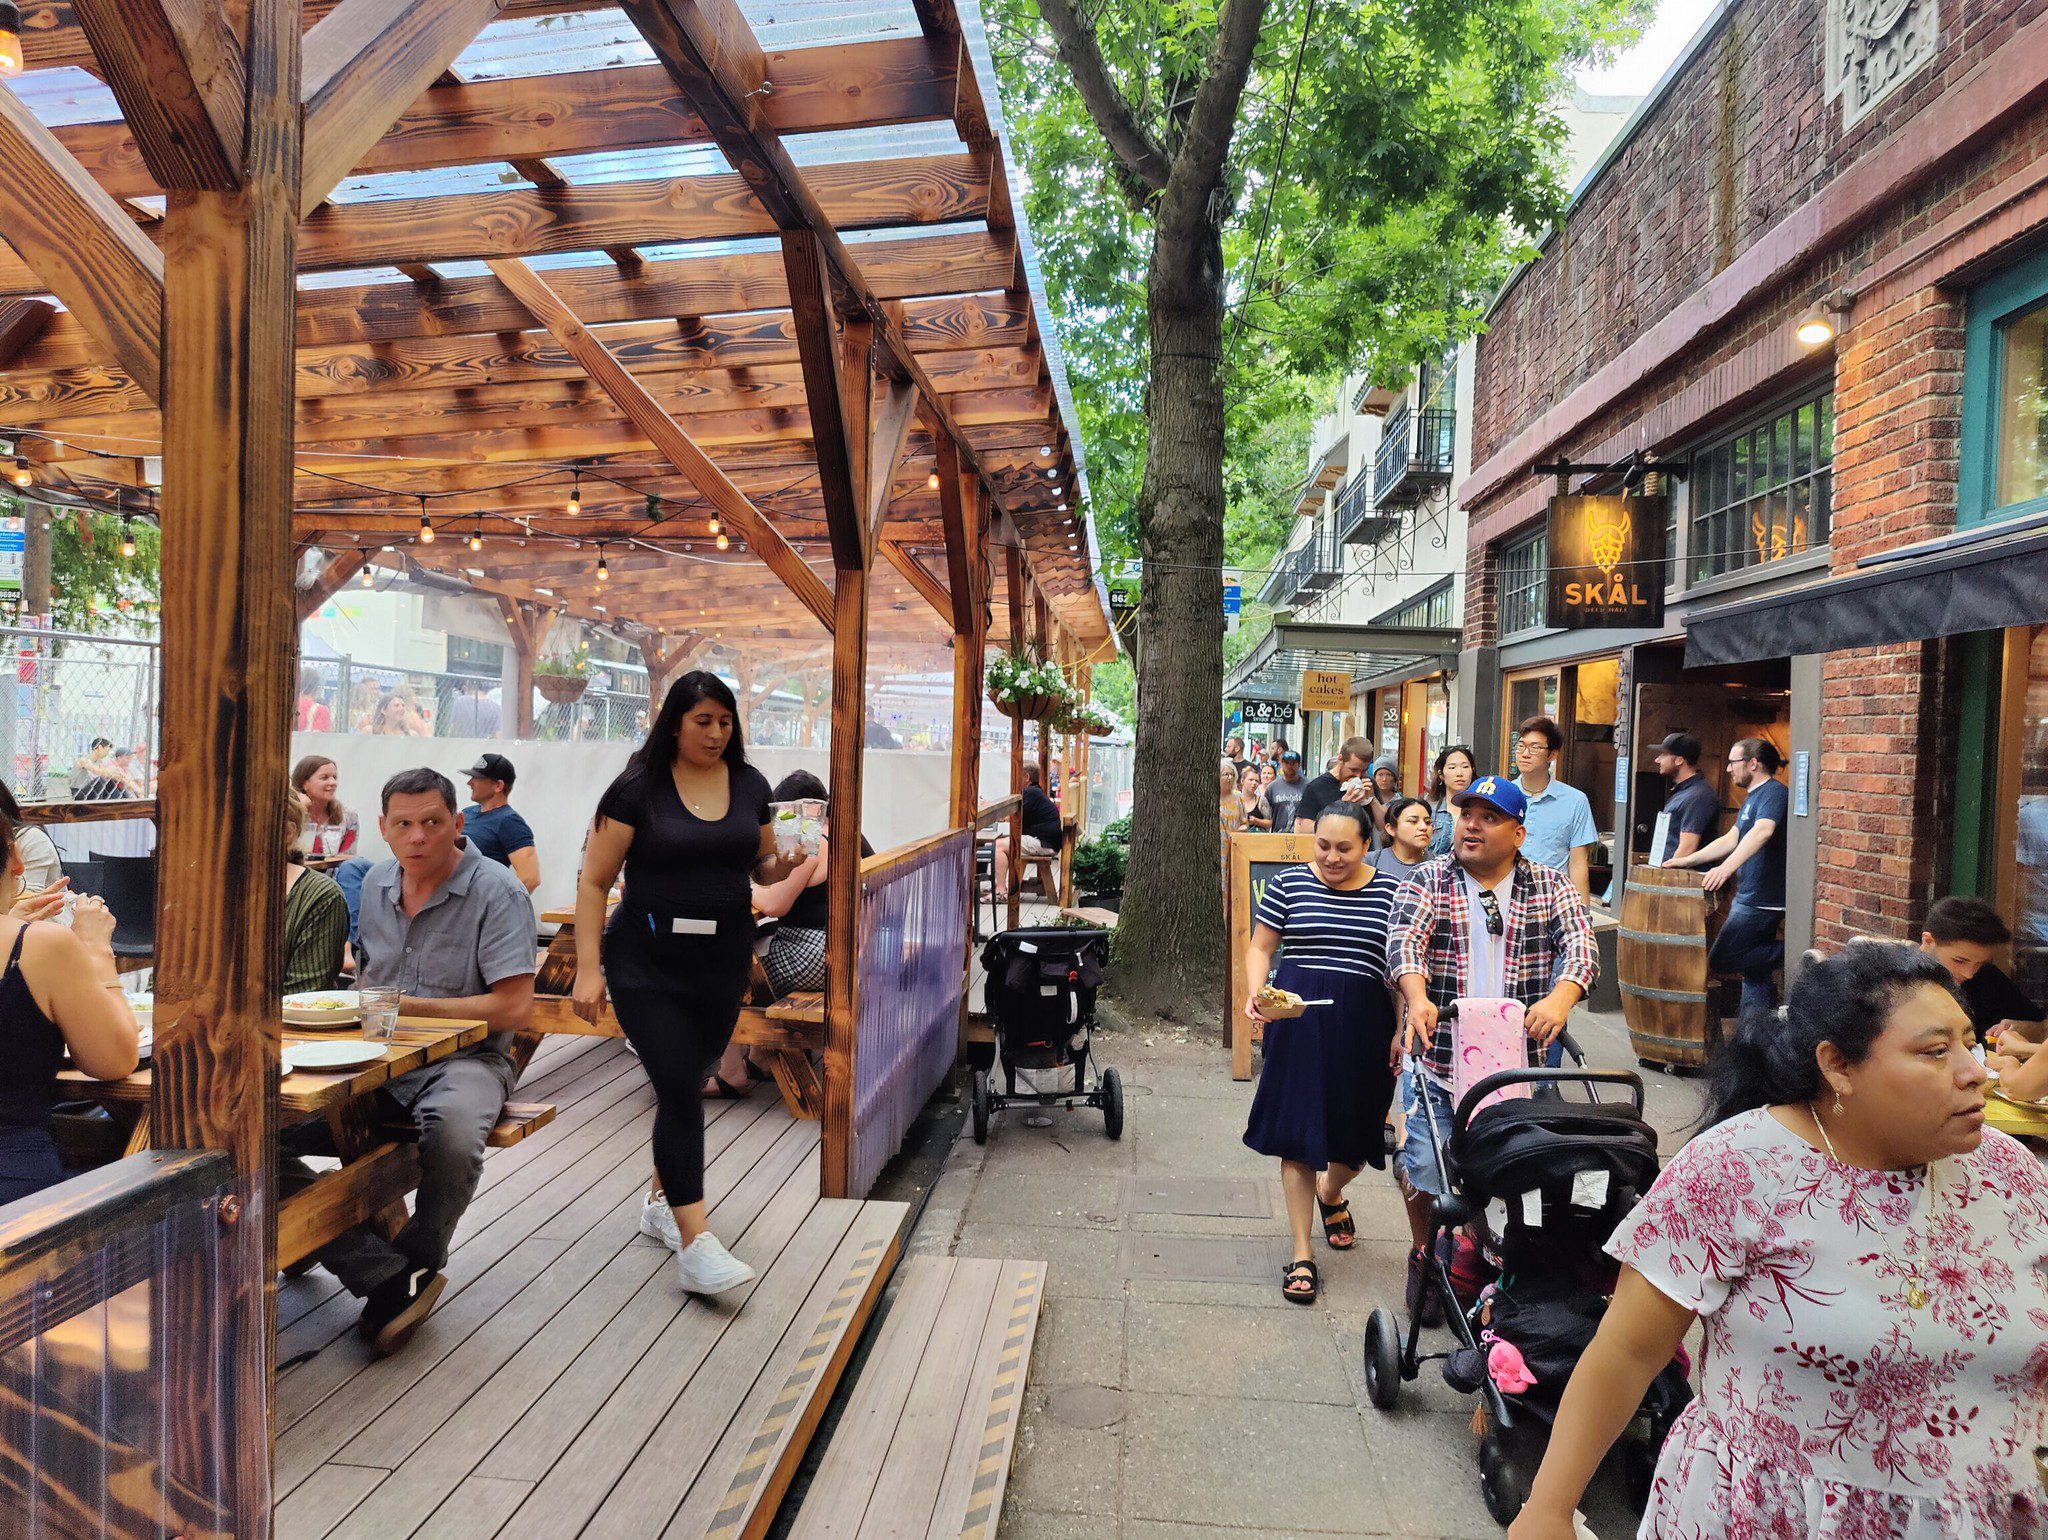 People enjoying an outdoor meal and walking on the sidewalk along Ballard Ave NW, on a busy summer weekend. Many people are visible sitting and walking, with a large tree in the middle and buildings on the right.